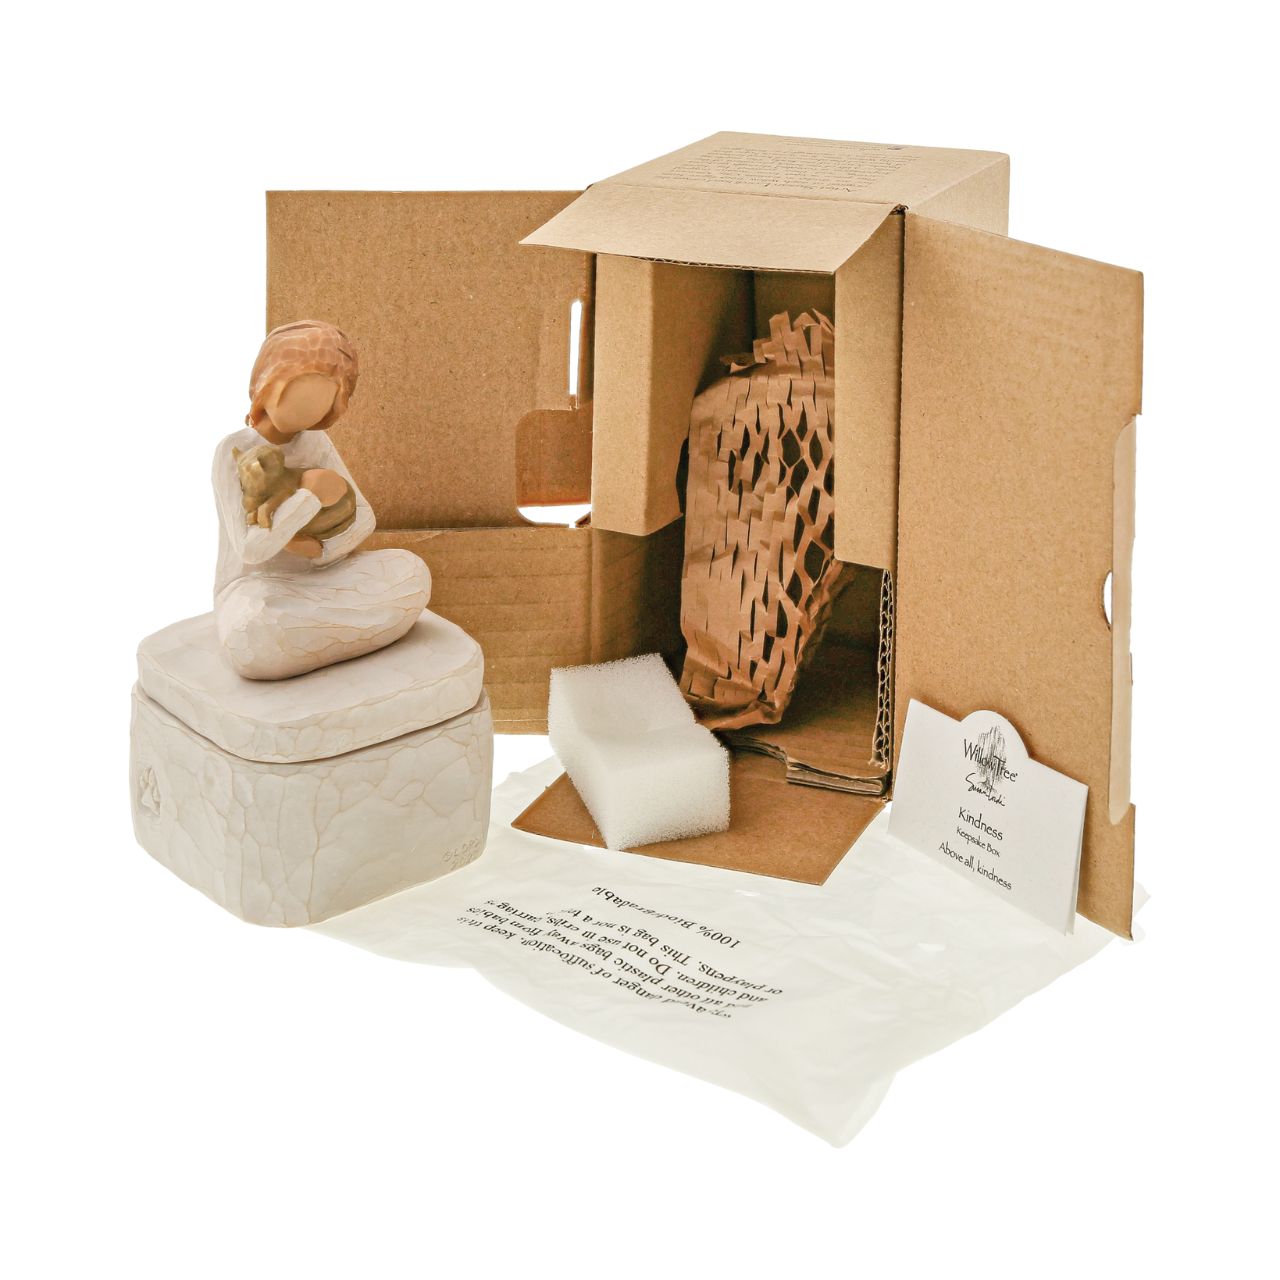 Kindness Girl Keepsake Box by Willow Tree  A gift for those who love cats and treasure their affection. Keepsake Boxes are small, sweet places to keep jewellery, hair accessories, notes. Inside, the bottom of this box reveals the sentiment, "Above all, kindness".